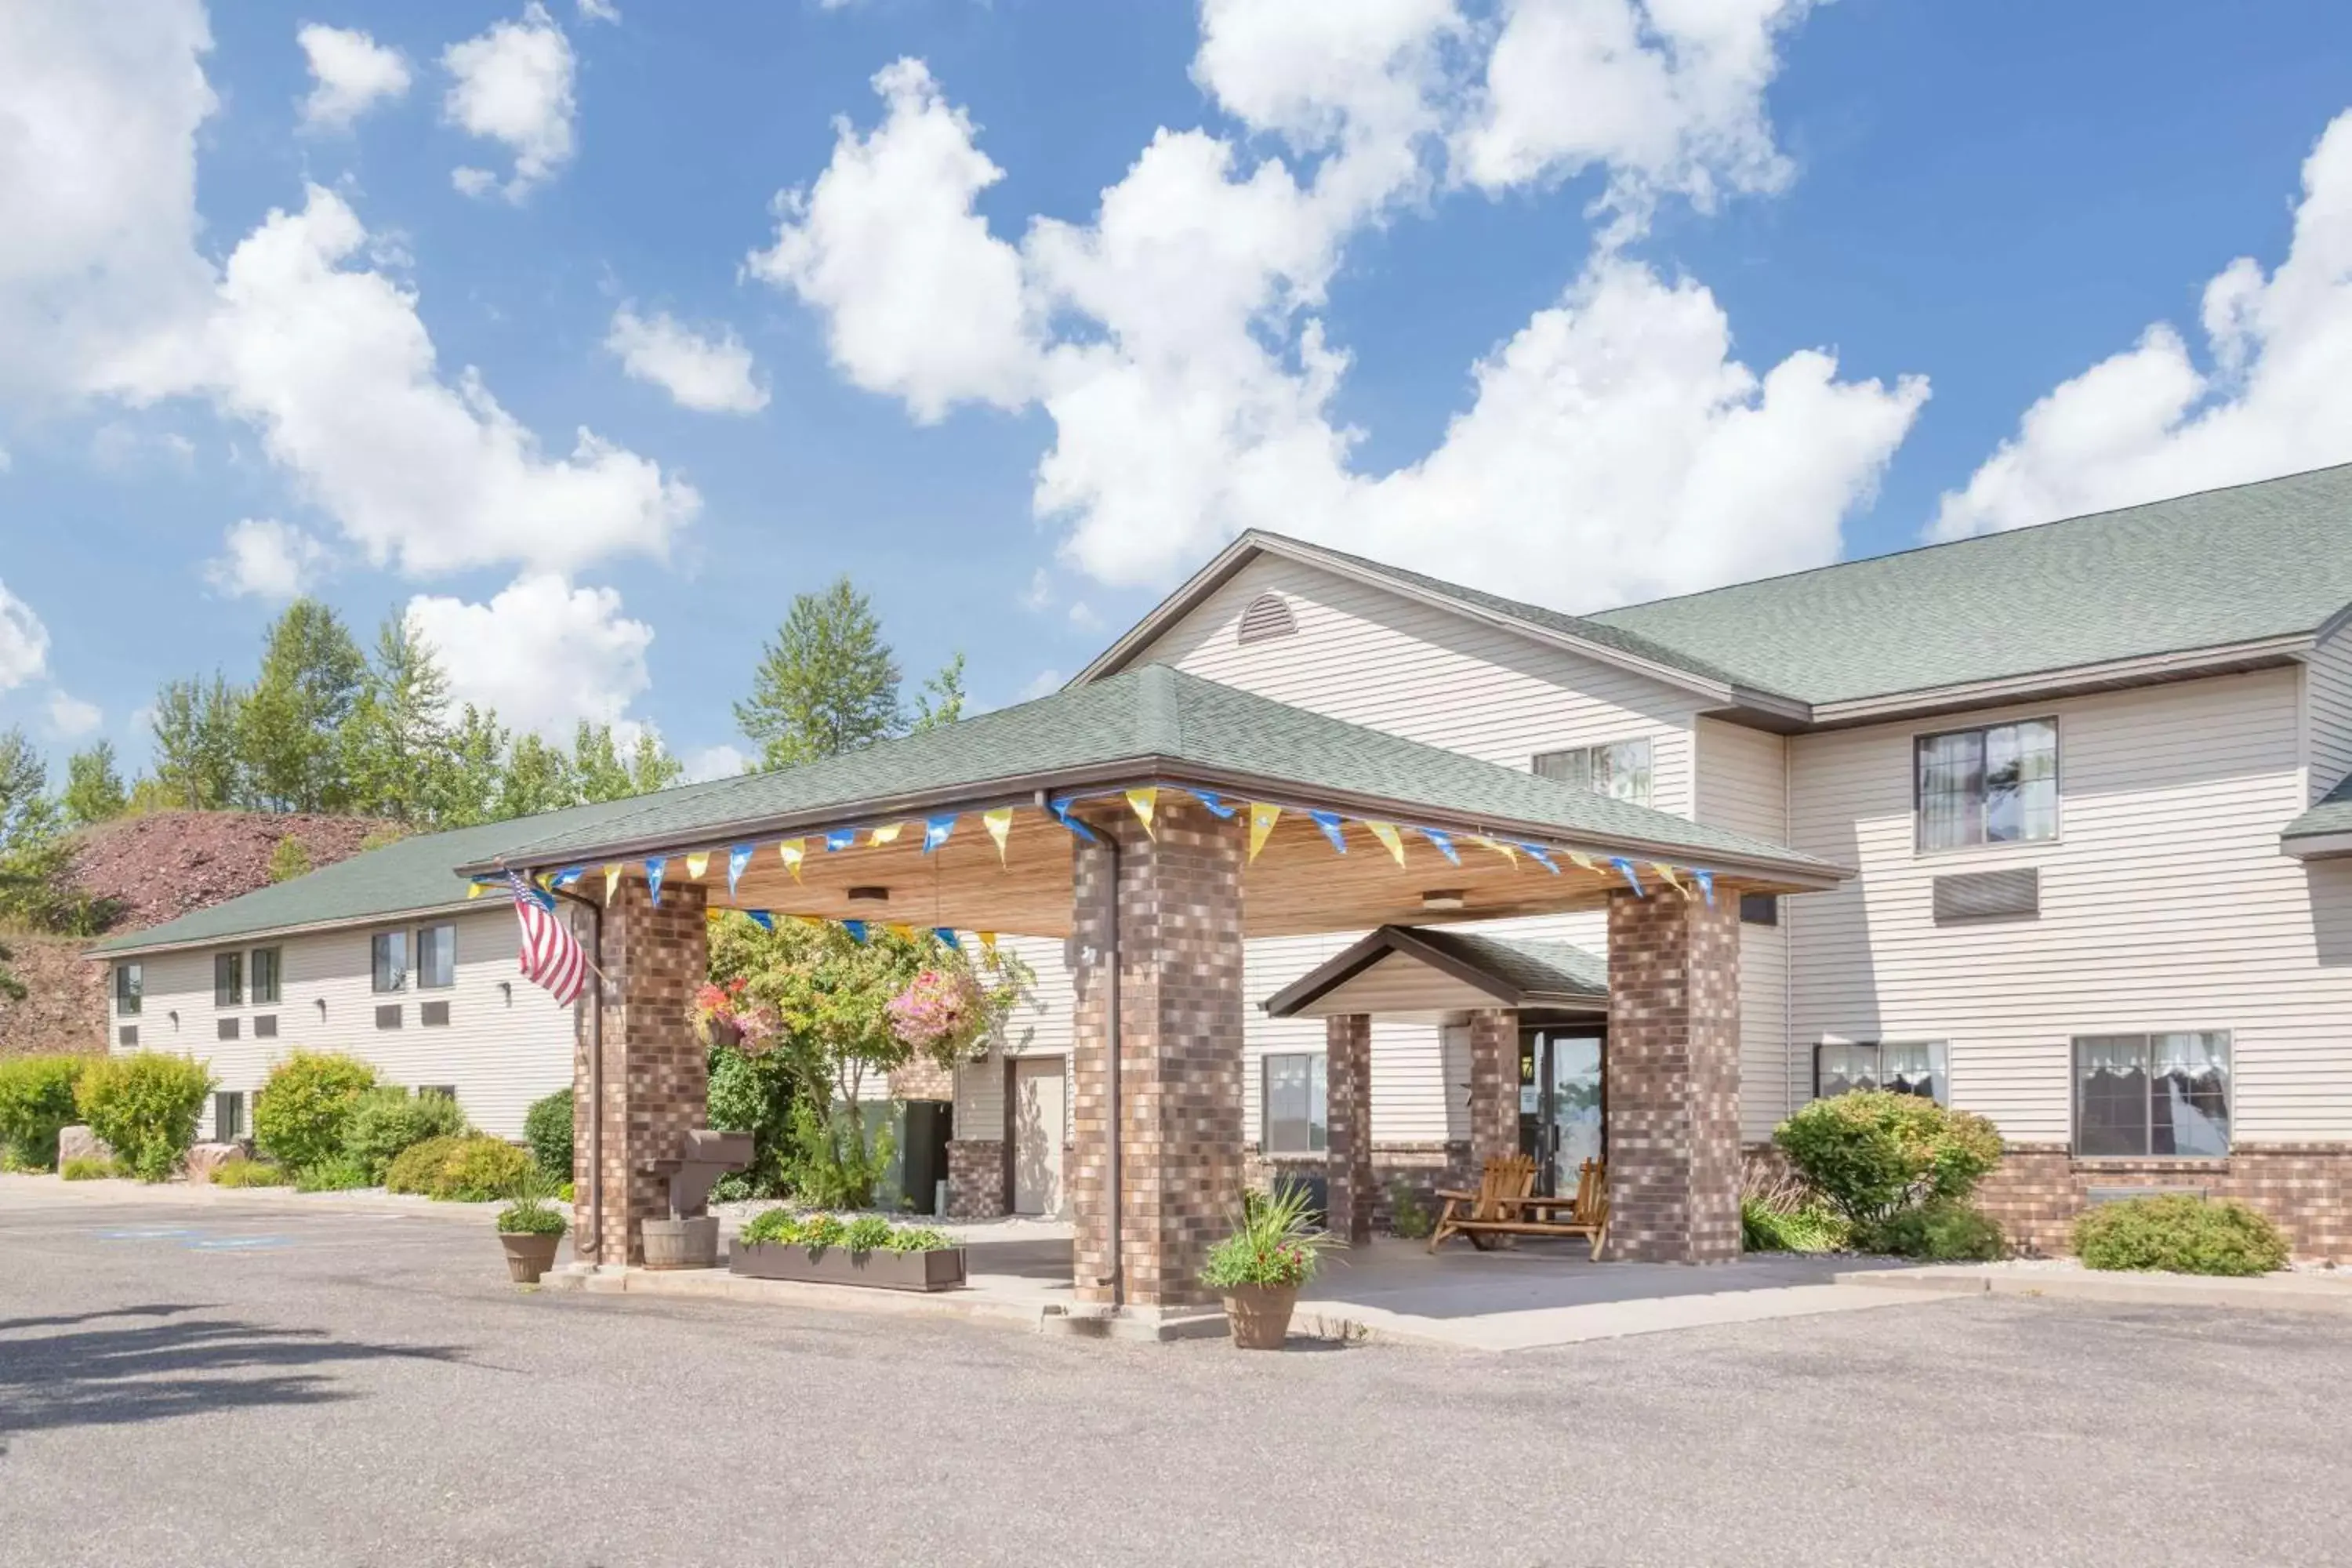 Property Building in Days Inn by Wyndham Iron Mountain